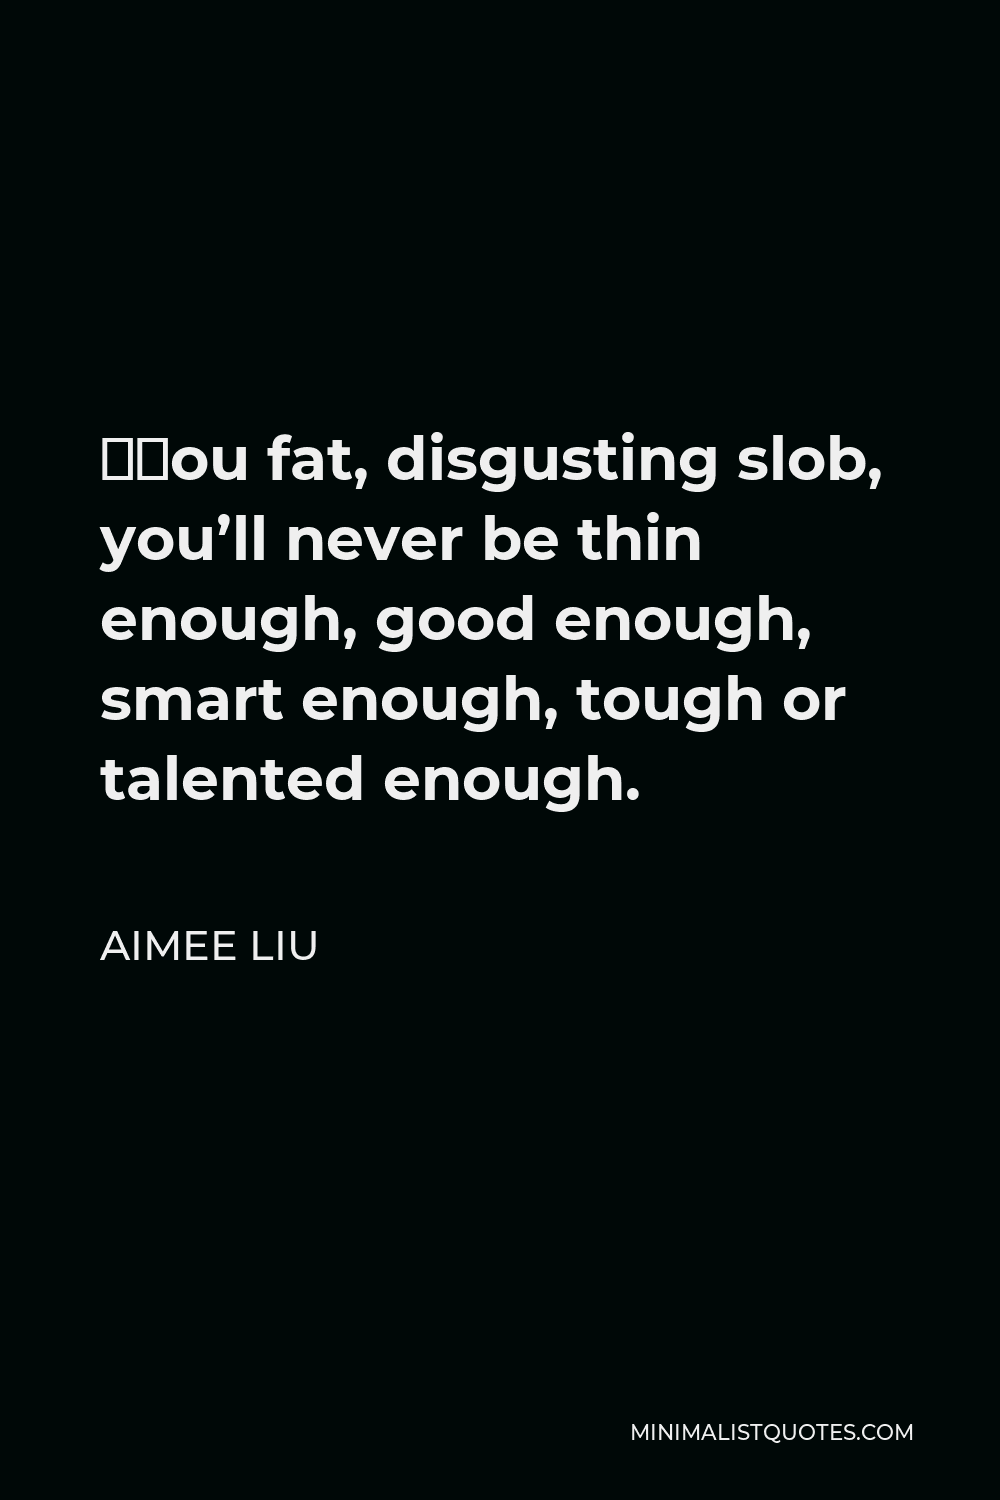 Aimee Liu Quote - “You fat, disgusting slob, you’ll never be thin enough, good enough, smart enough, tough or talented enough.